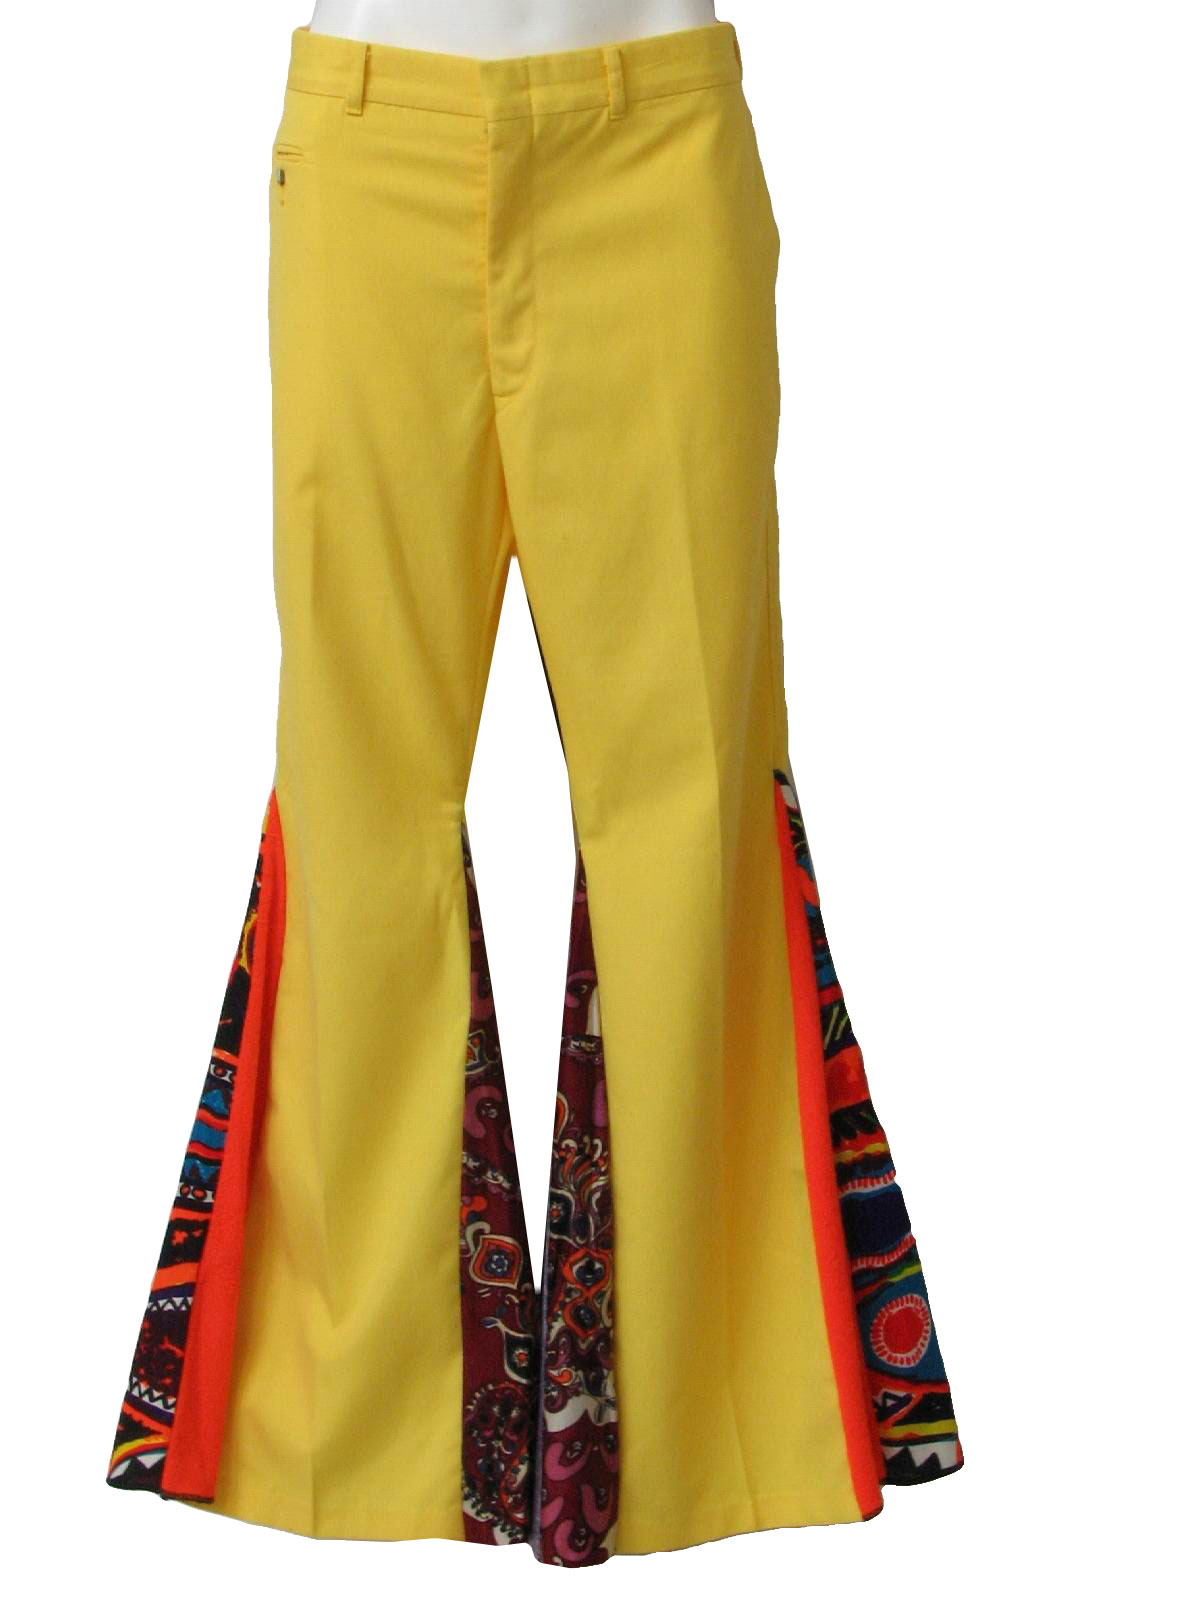 Retro Seventies Bellbottom Pants: 70s -No Label- Mens bright yellow  polyester bell bottoms pants with fun bright hand sewn fabric inserts on  each side of the forty inch bell. Front inset pockets